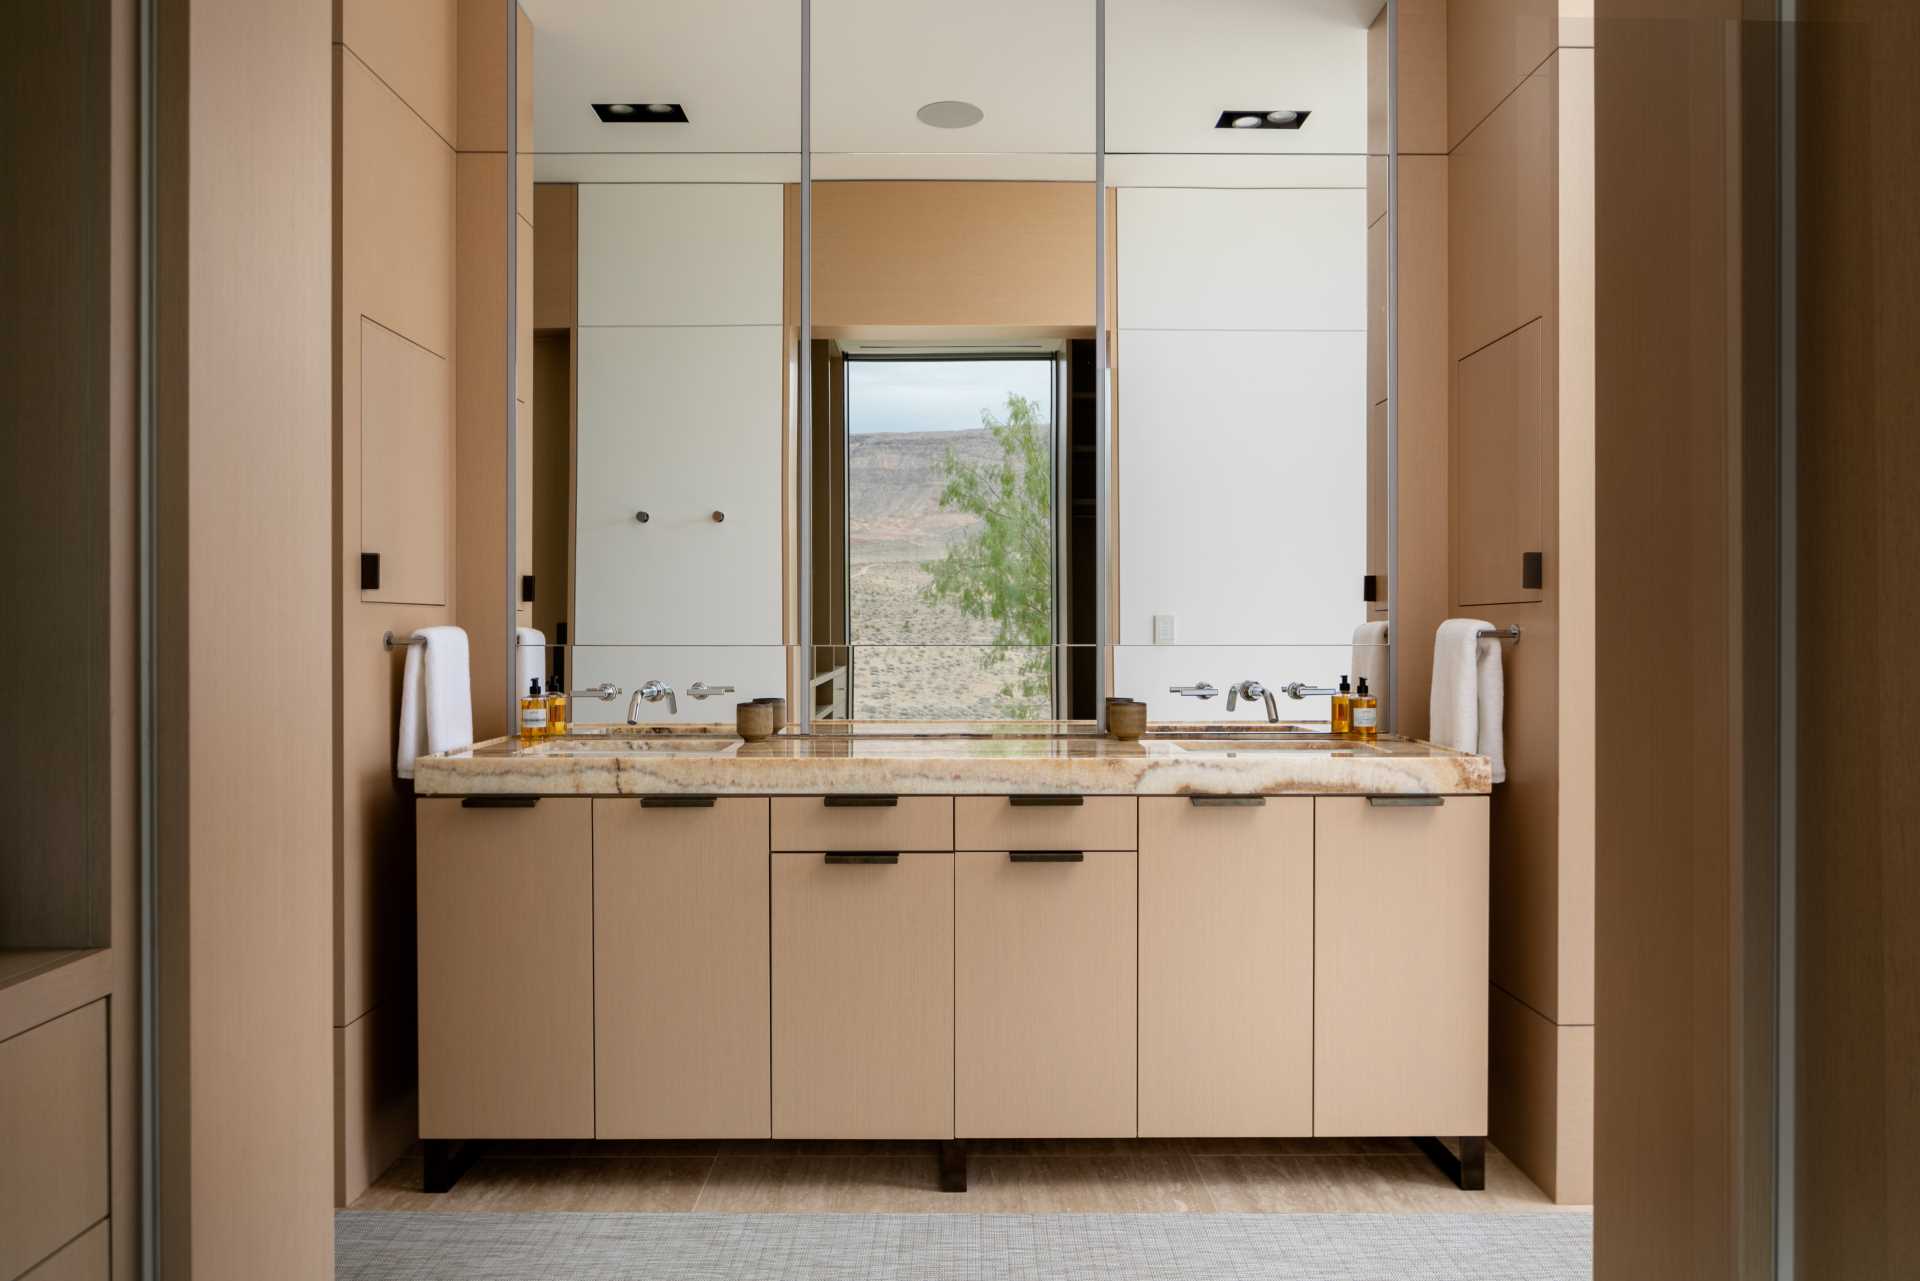 A modern bathroom with a large mirror covering the wall above the vanity.